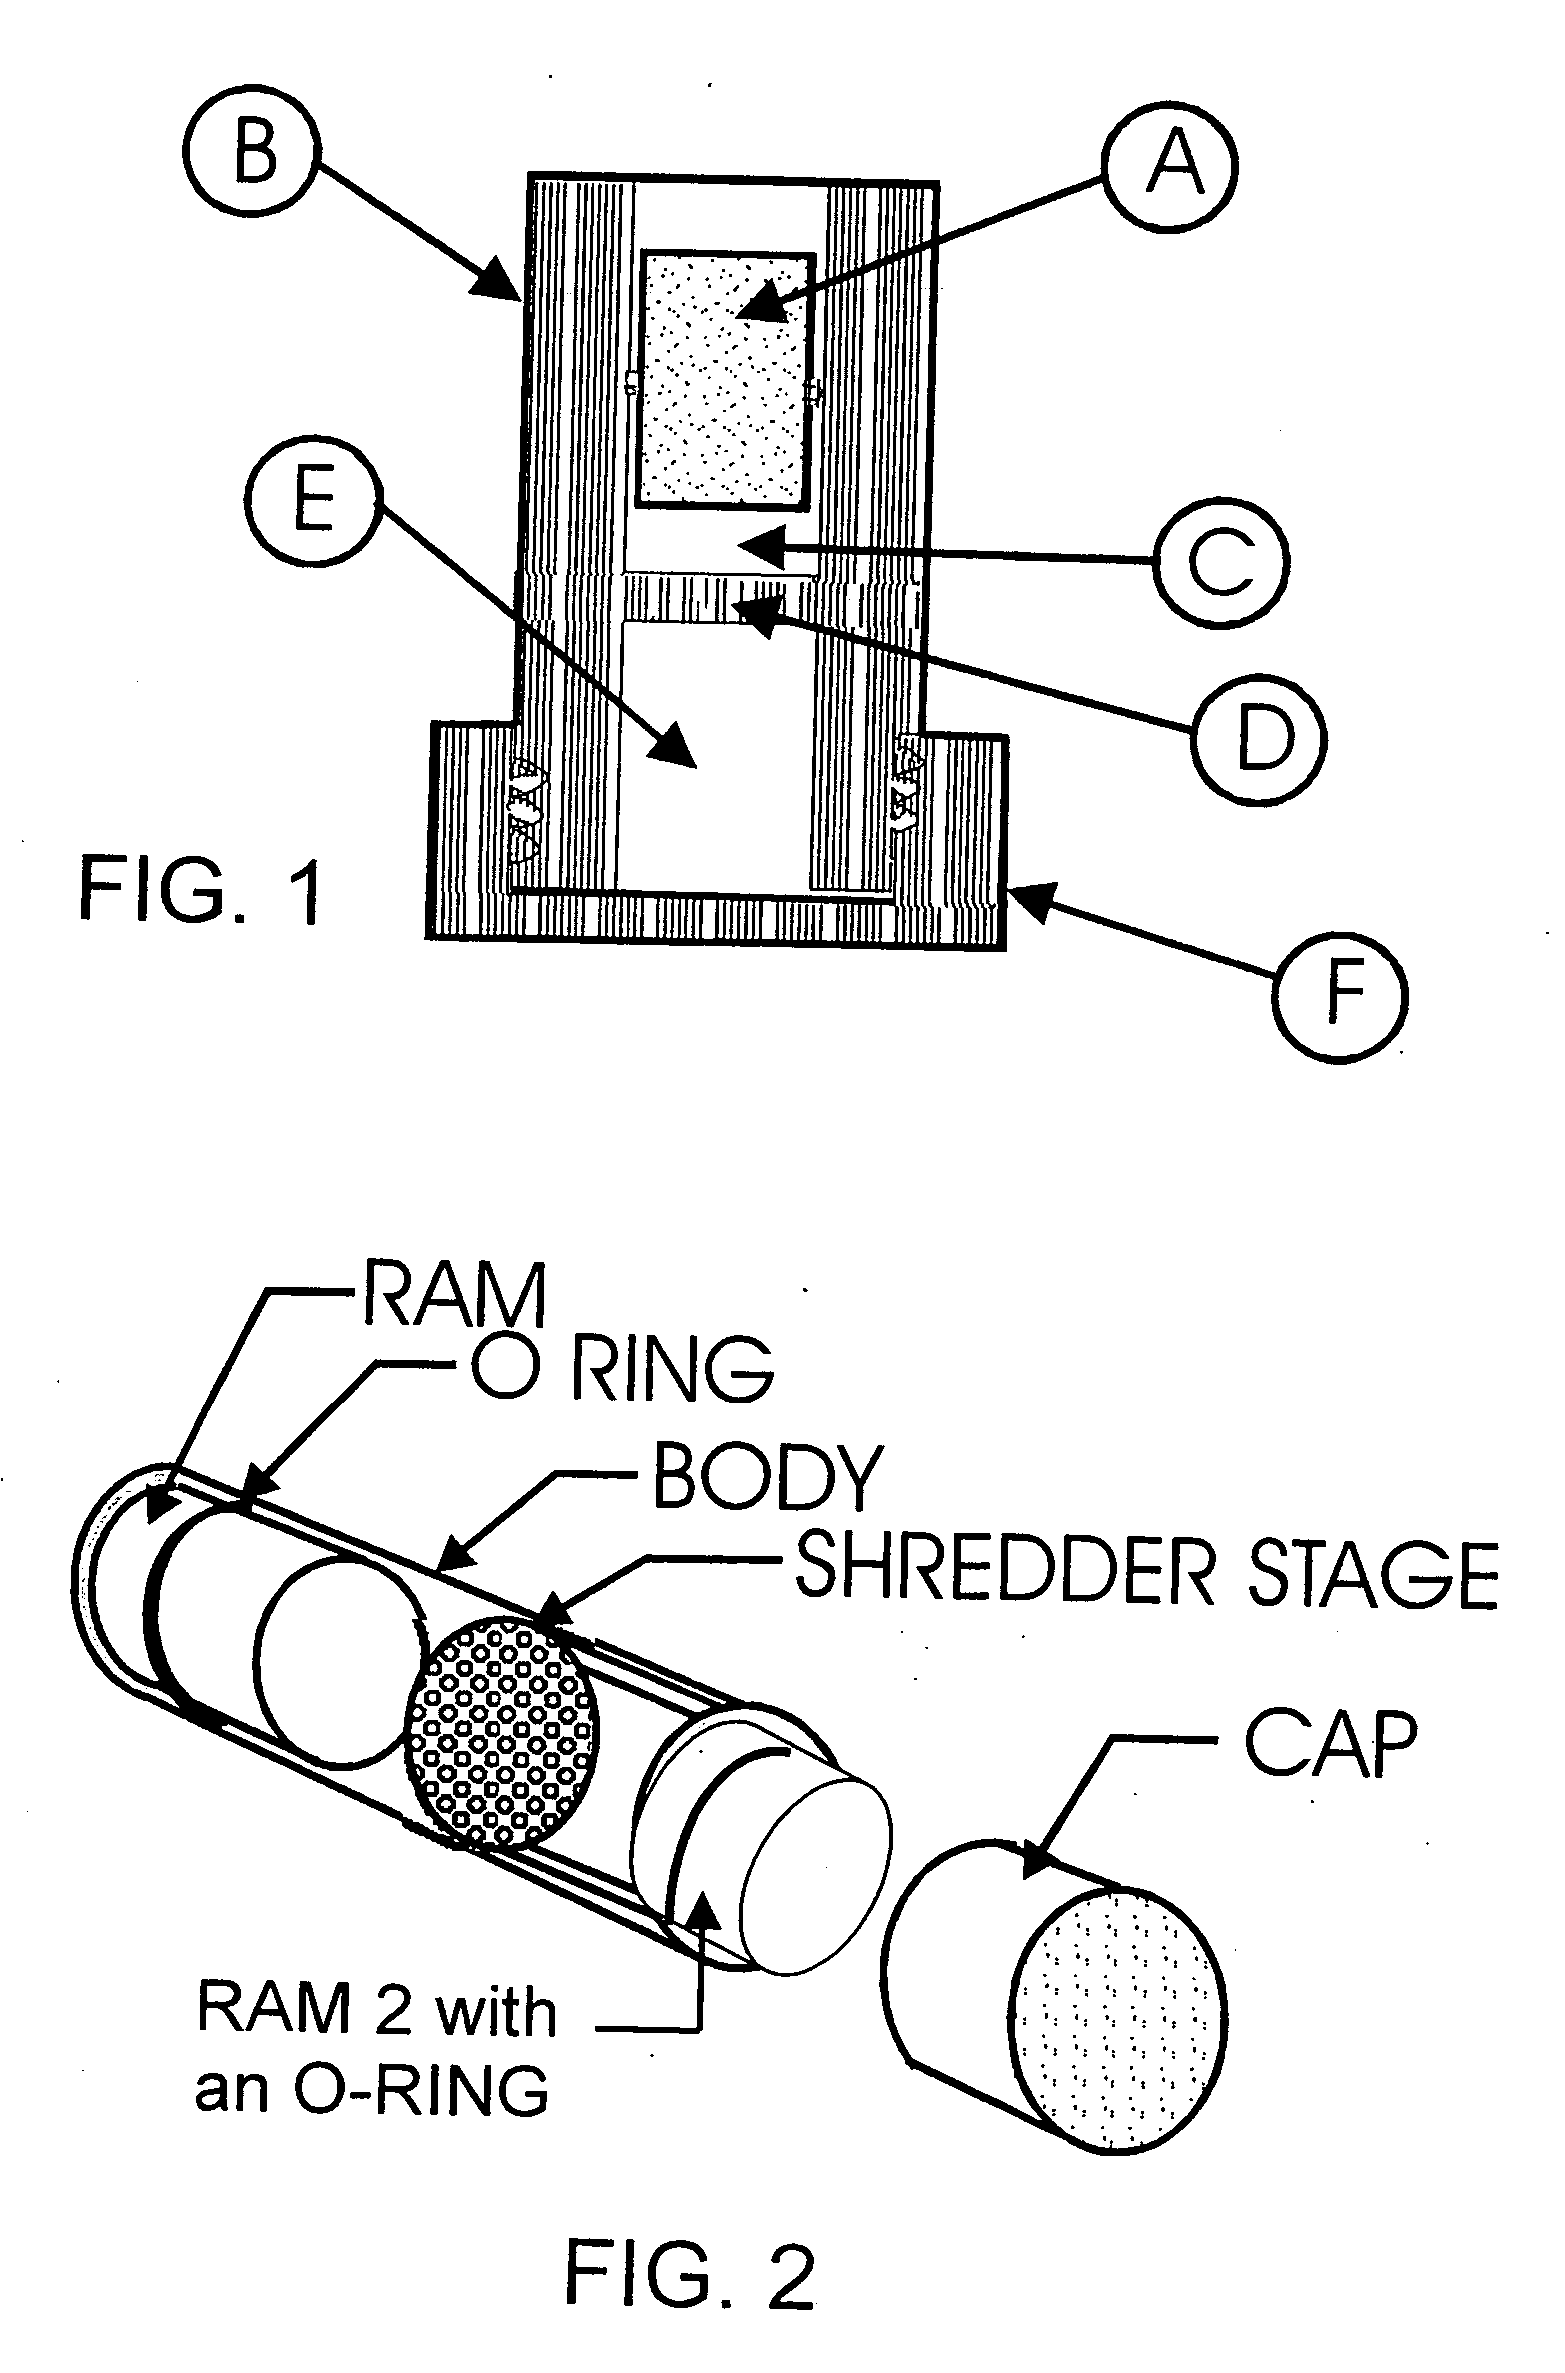 Multichamber device for processing of biological samples using high pressure